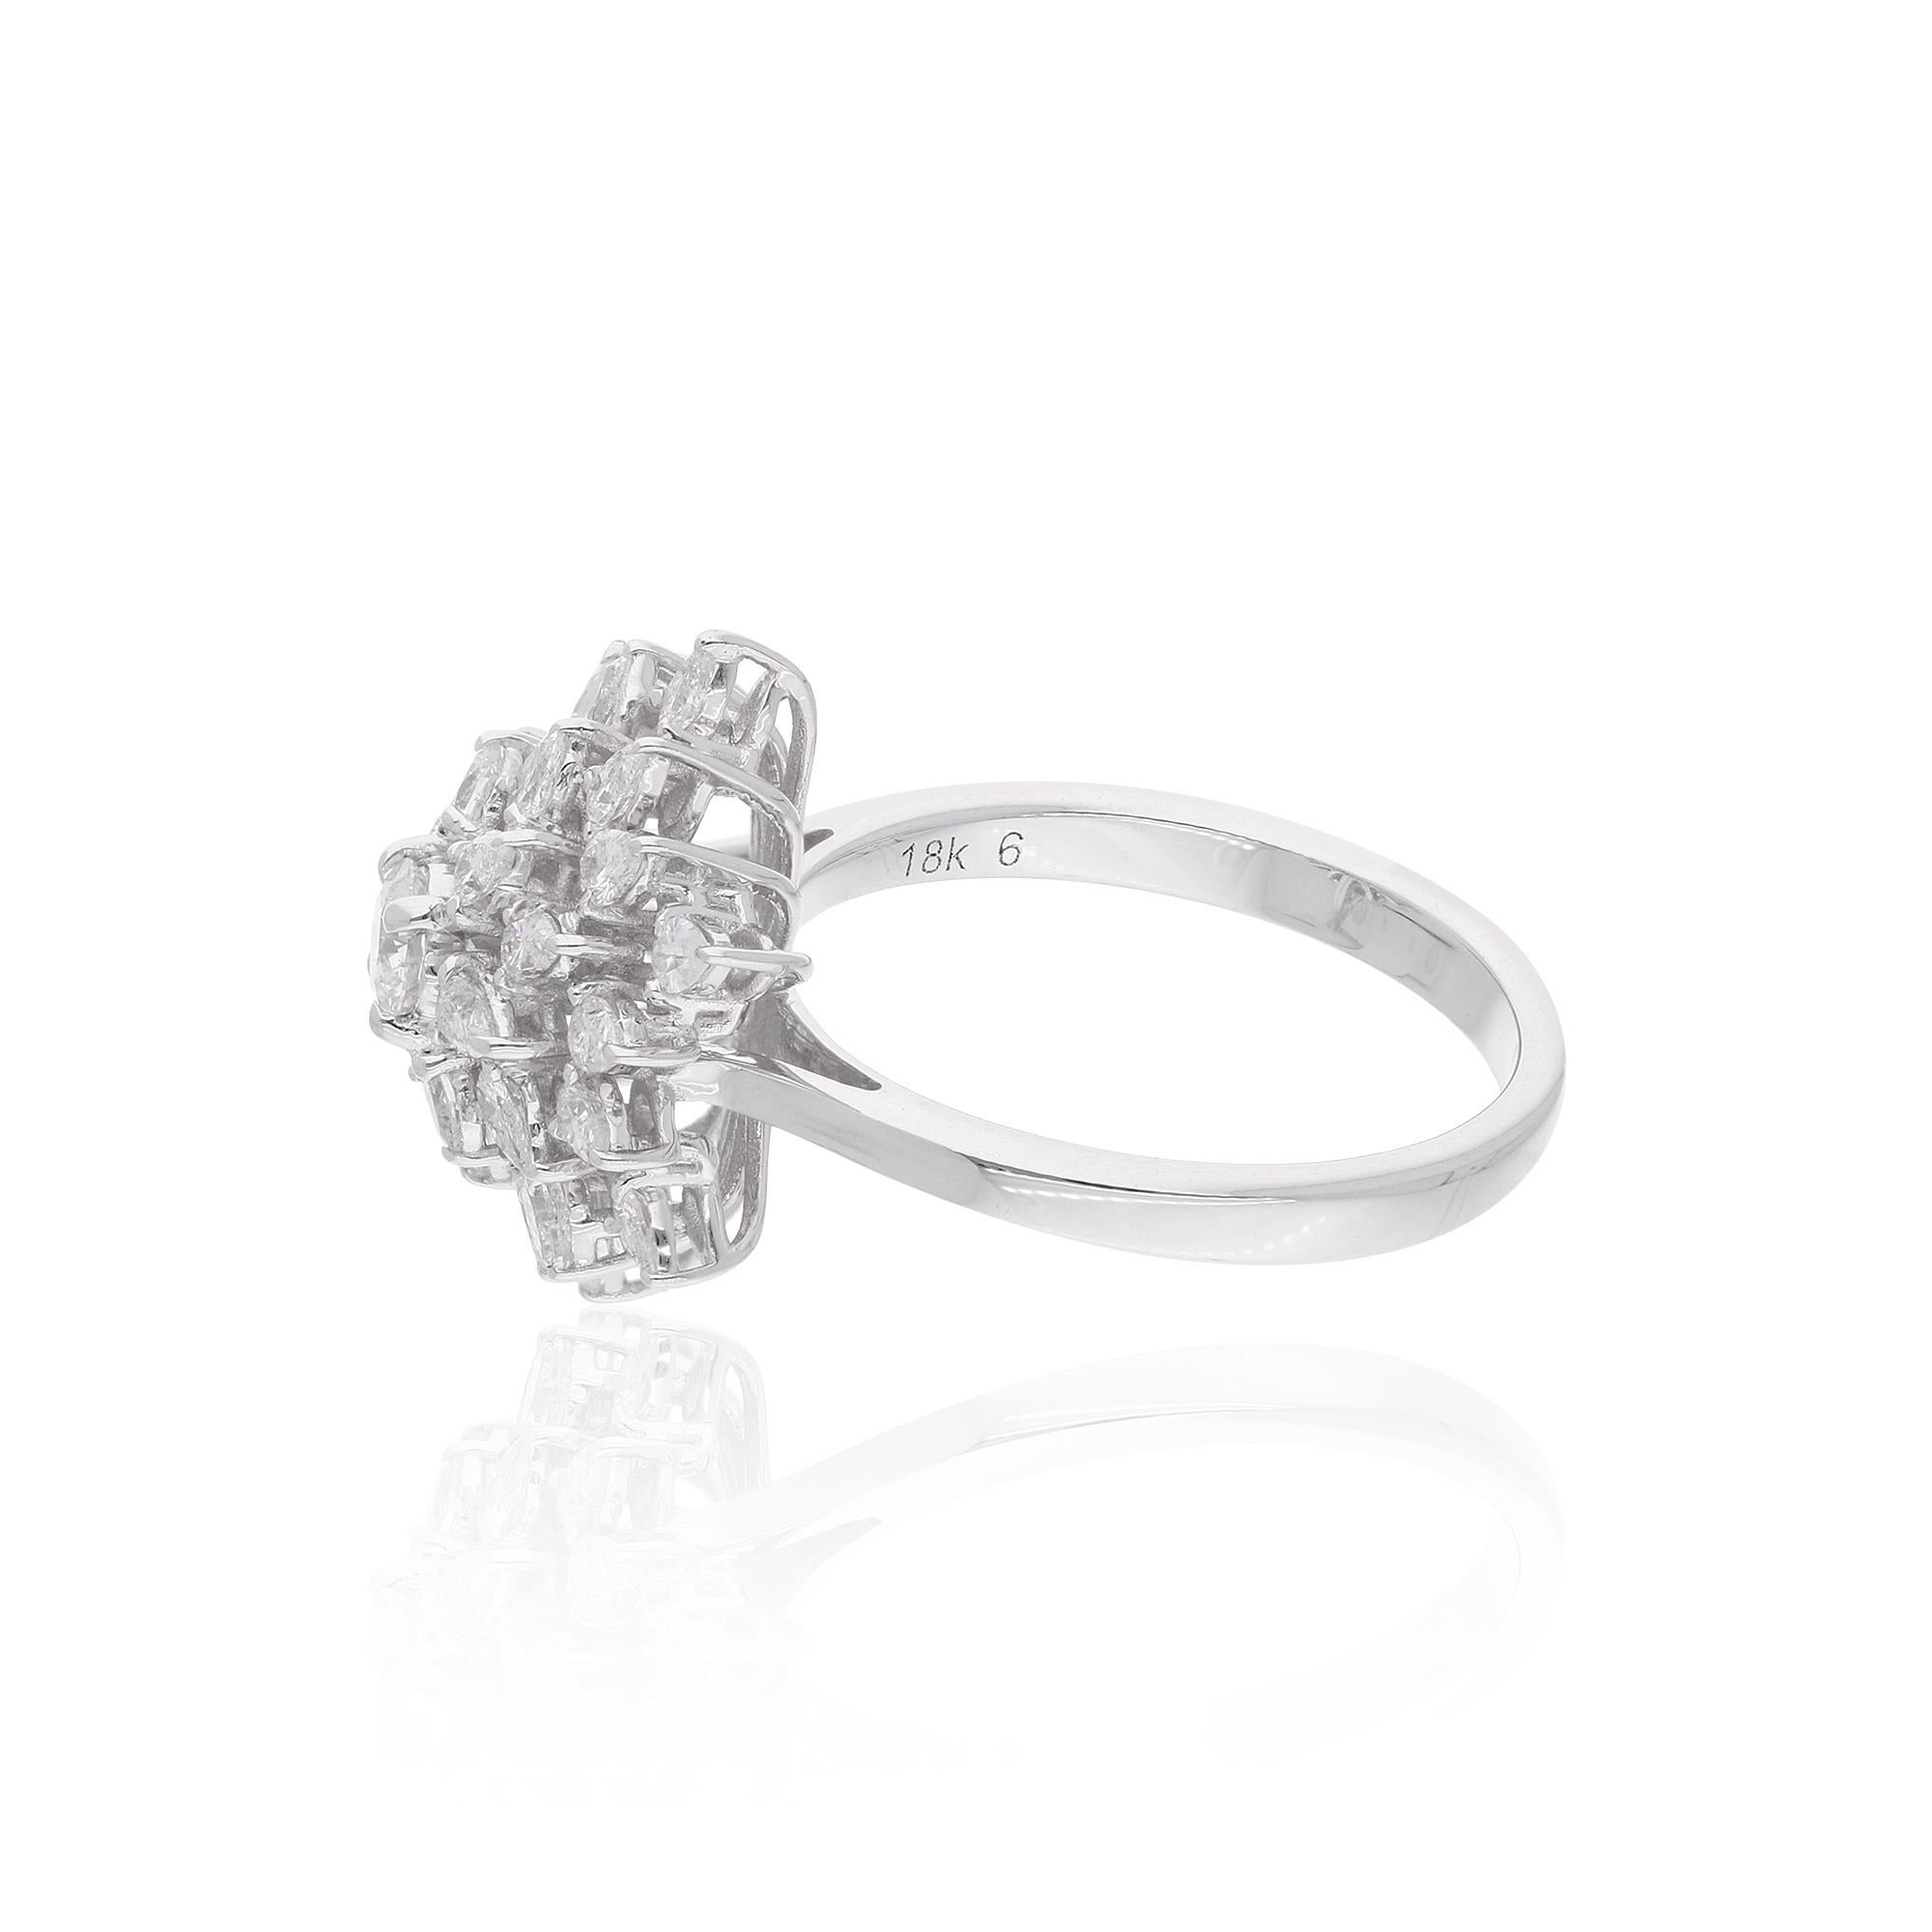 Crafted in solid 14k Gold, this ring features a cluster of sparkling diamonds, creating a truly dazzling effect. The diamonds are expertly set in a secure prong setting, ensuring that they stay in place and catch the light at every angle. This ring